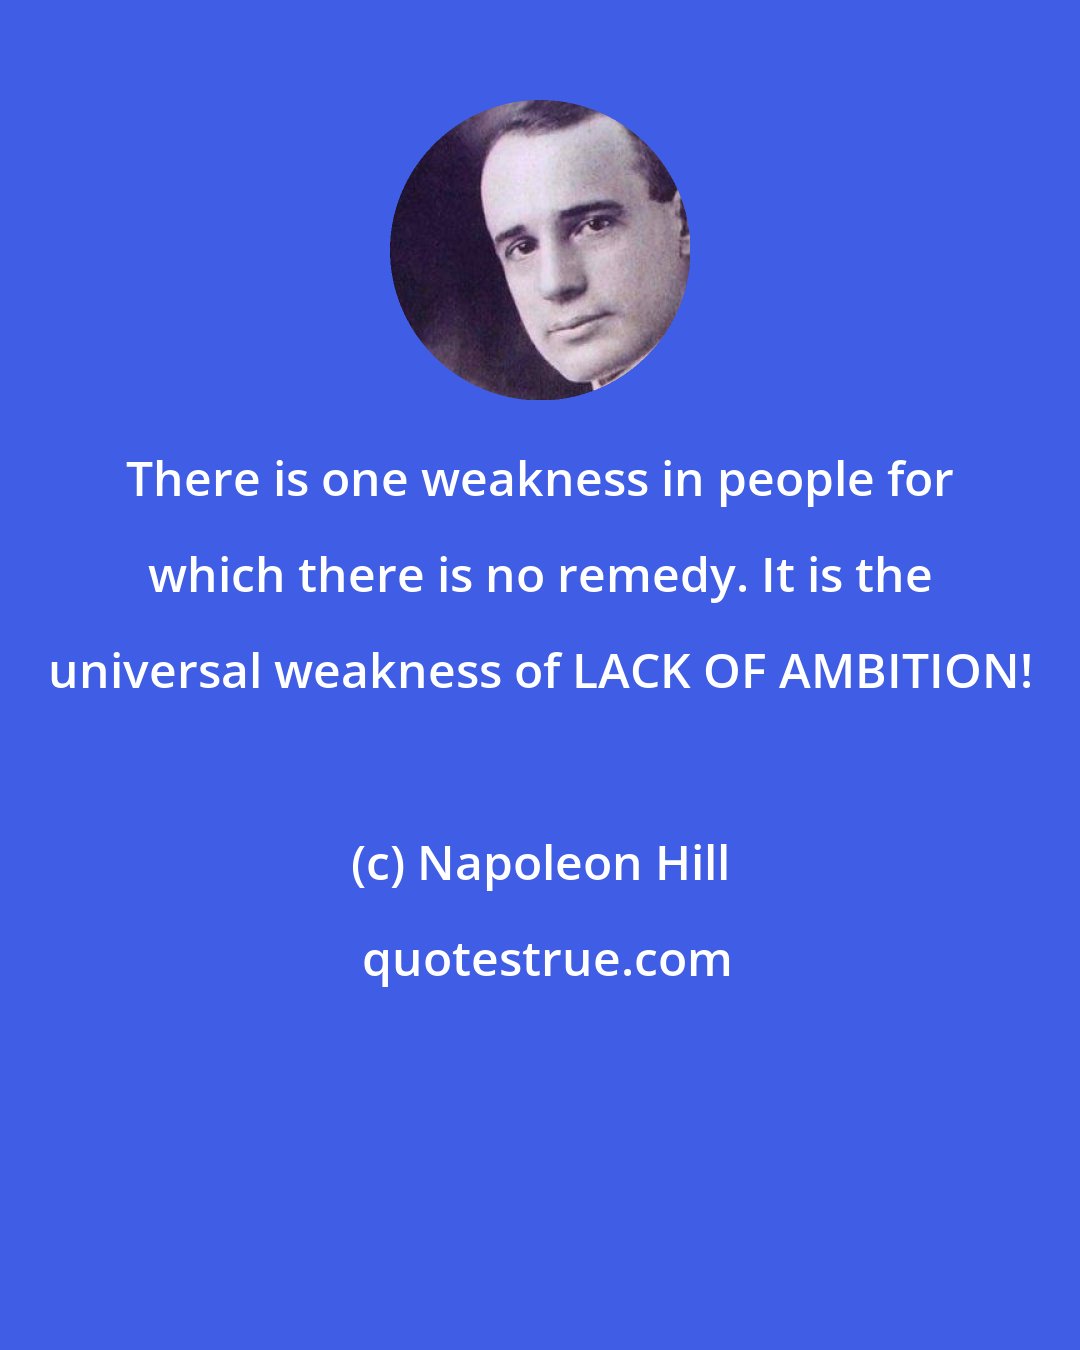 Napoleon Hill: There is one weakness in people for which there is no remedy. It is the universal weakness of LACK OF AMBITION!